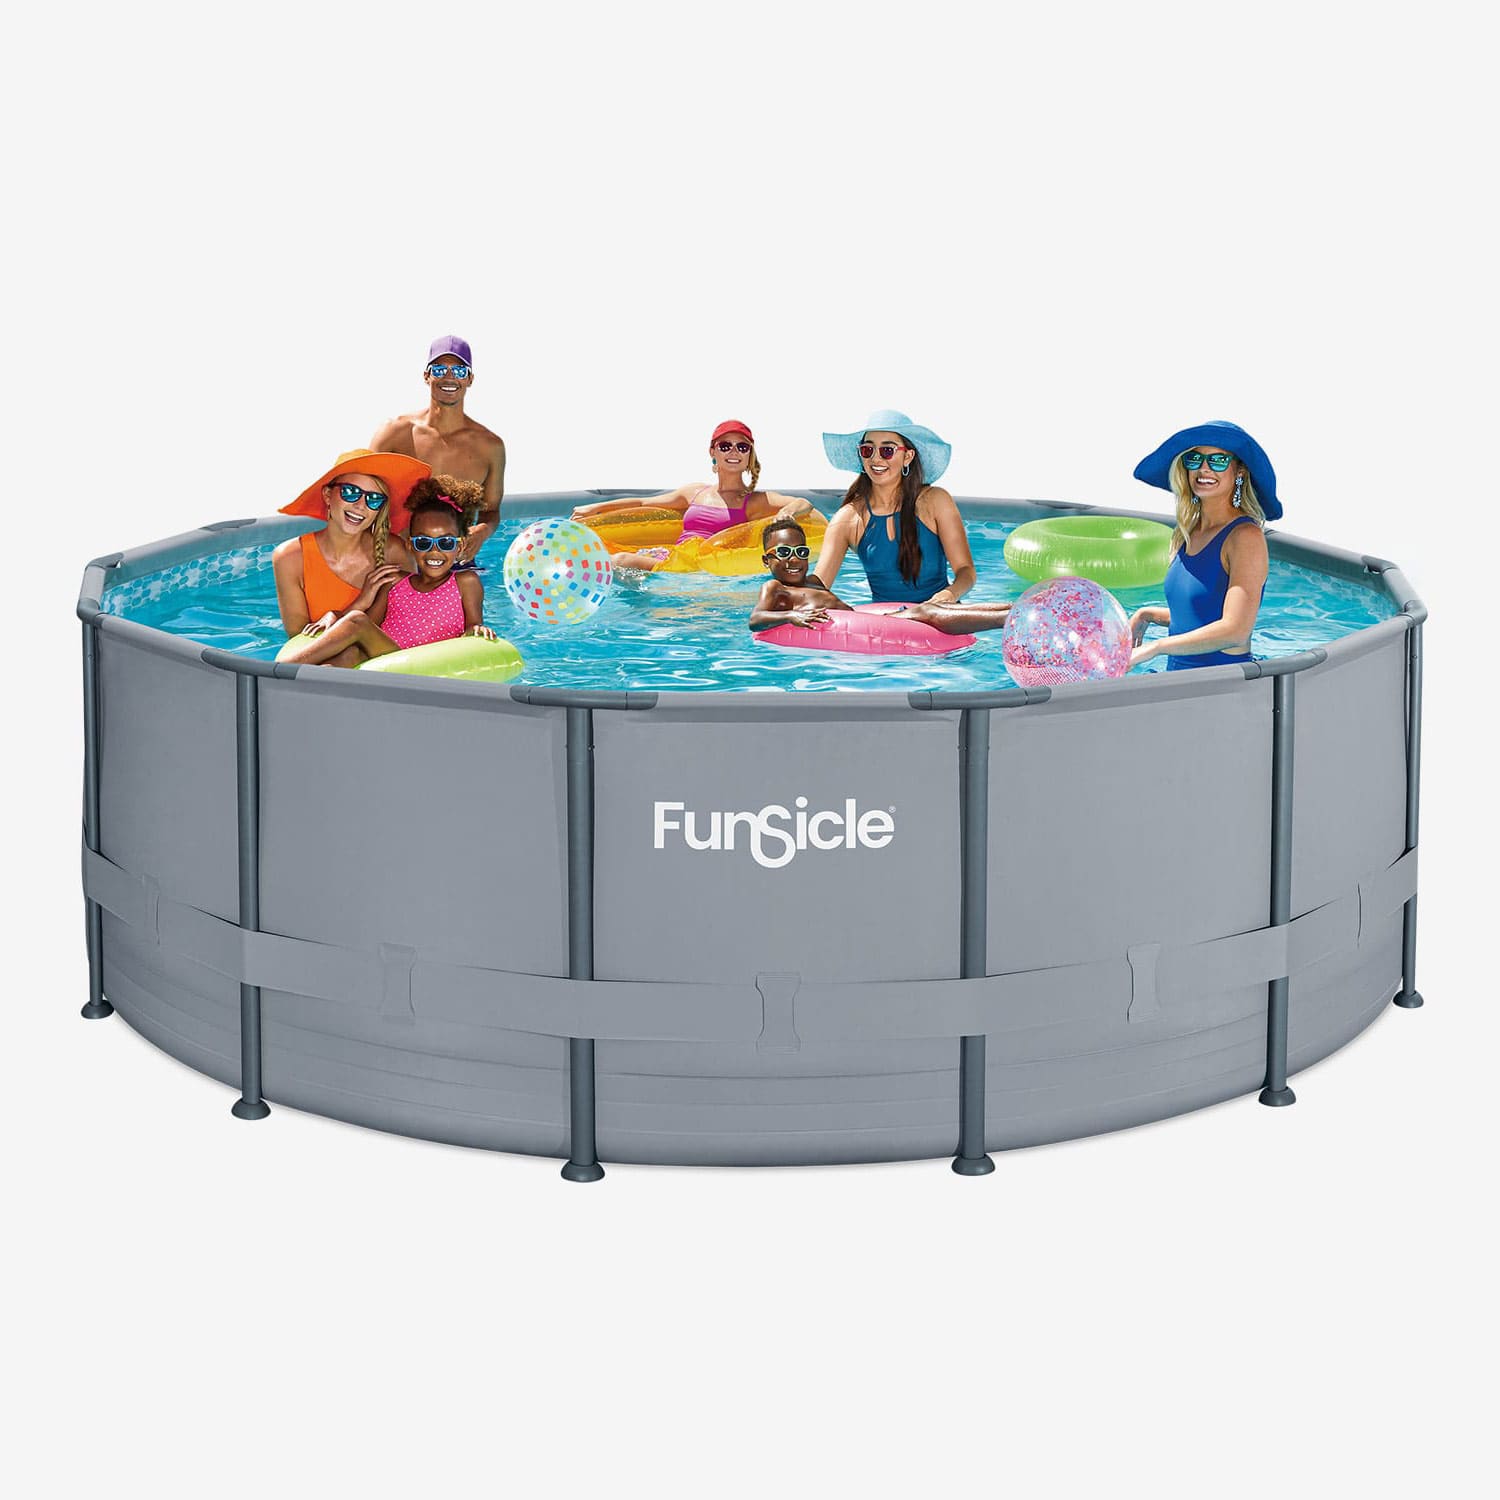 Funsicle 14 ft Oasis Pool with people